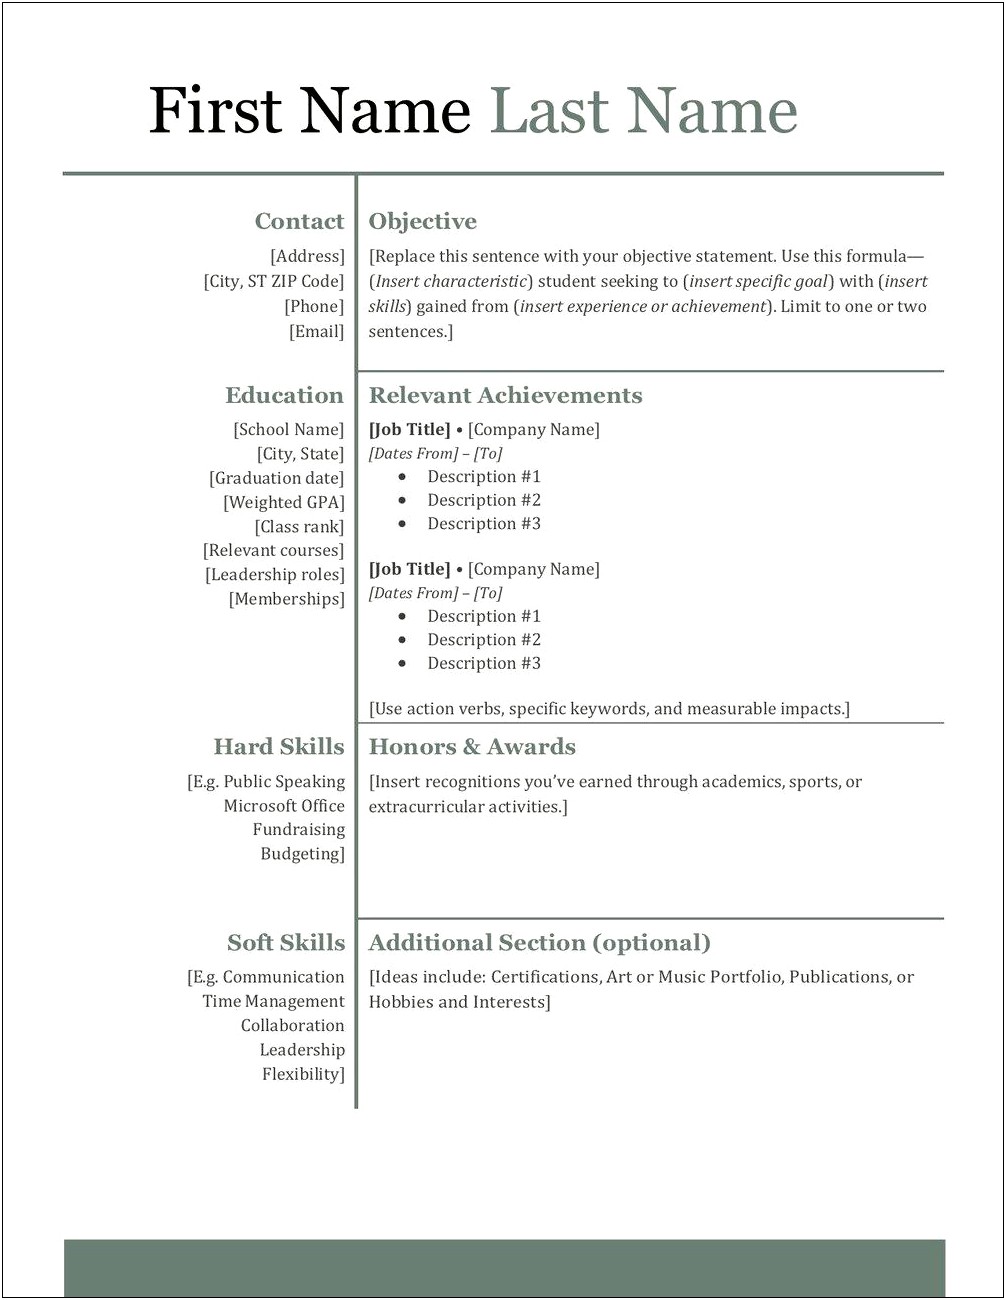 Resume For High School Student Objective